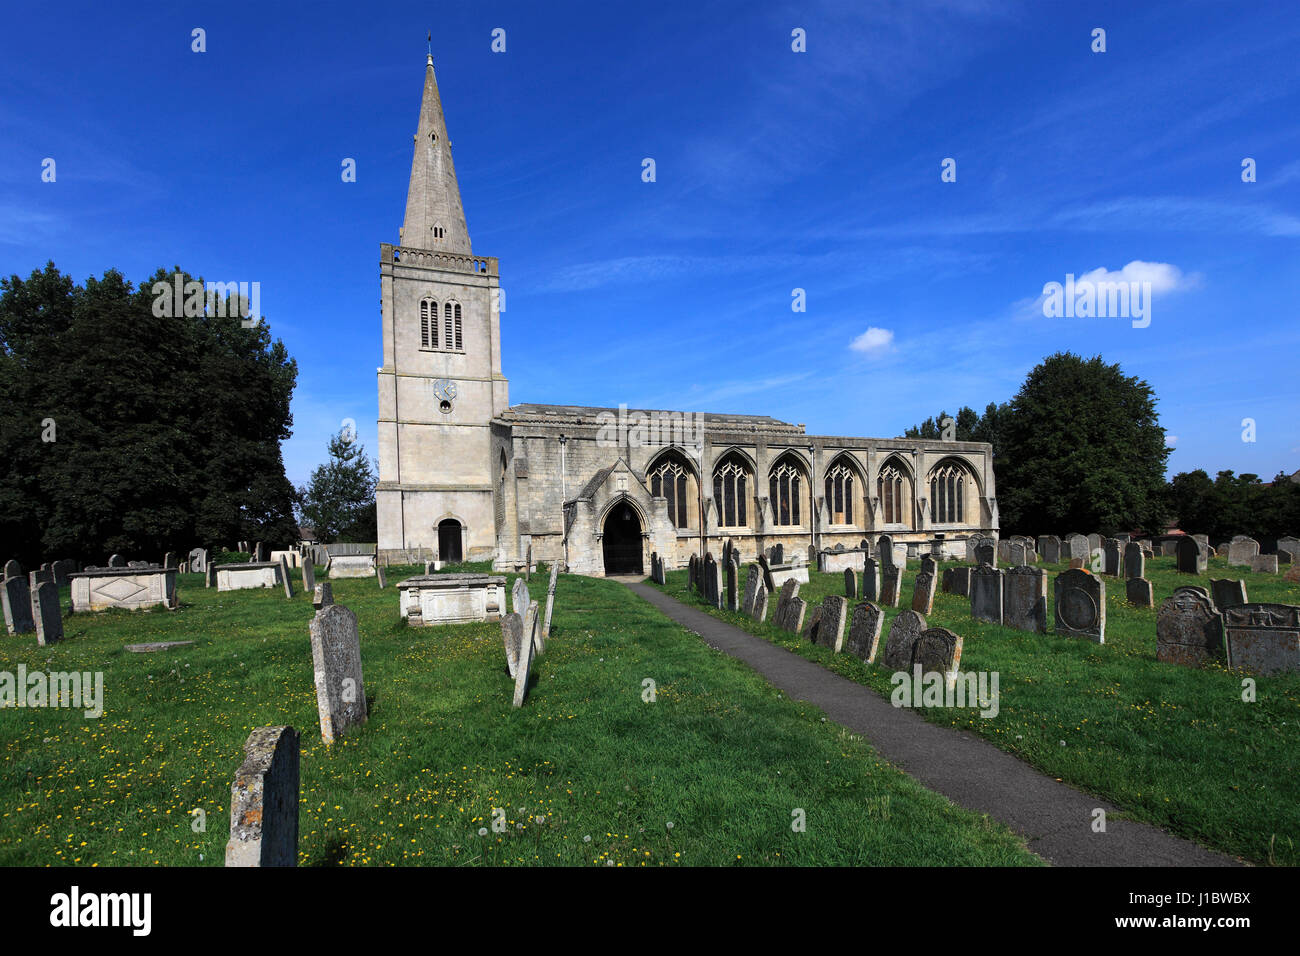 The Priory church Deeping St James, Lincolnshire County, England, UK Stock Photo